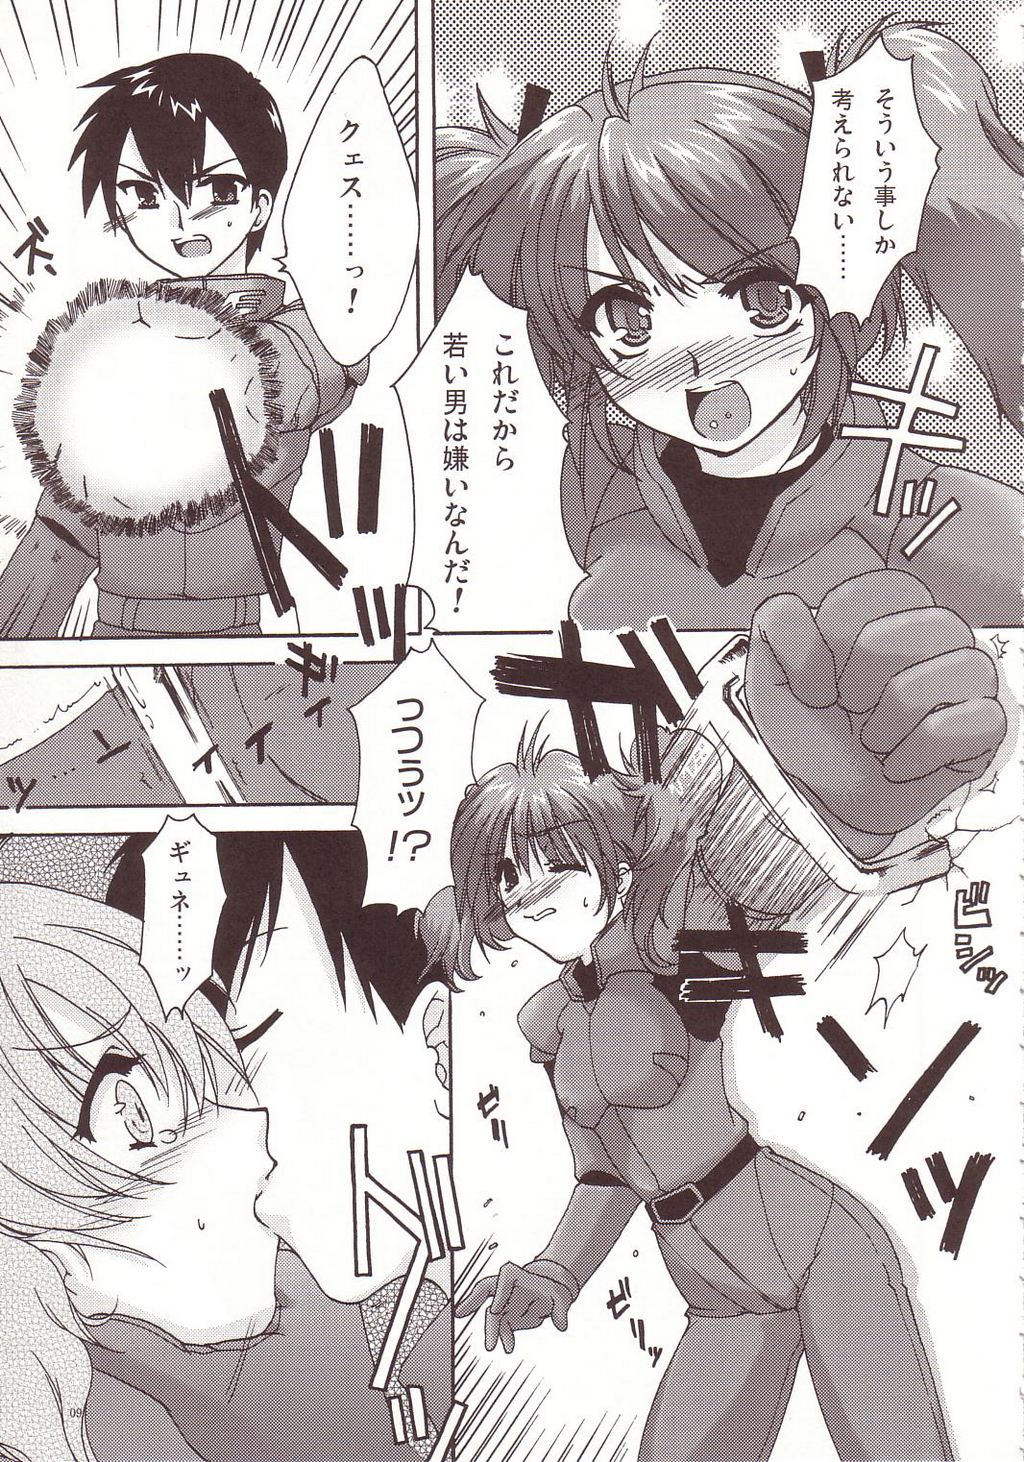 [AKABEi SOFT (Alpha)] Aishitai I WANT TO LOVE (Mobile Suit Gundam Char's Counterattack) page 8 full